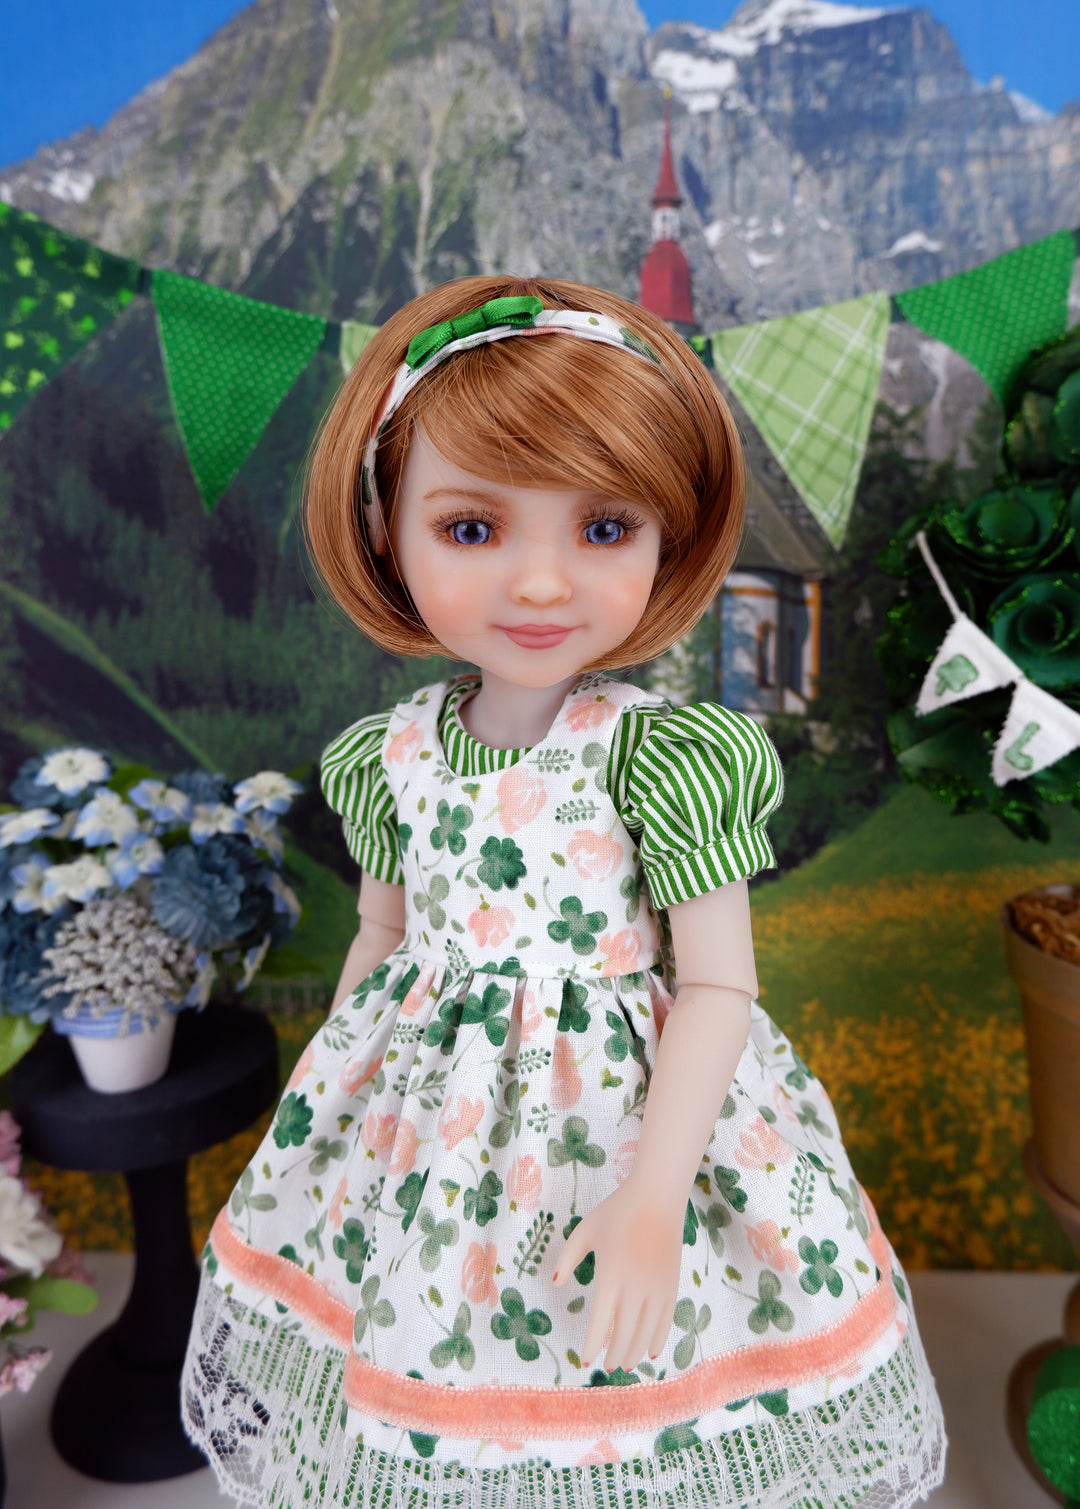 In Clover - dress & pinafore with shoes for Ruby Red Fashion Friends doll